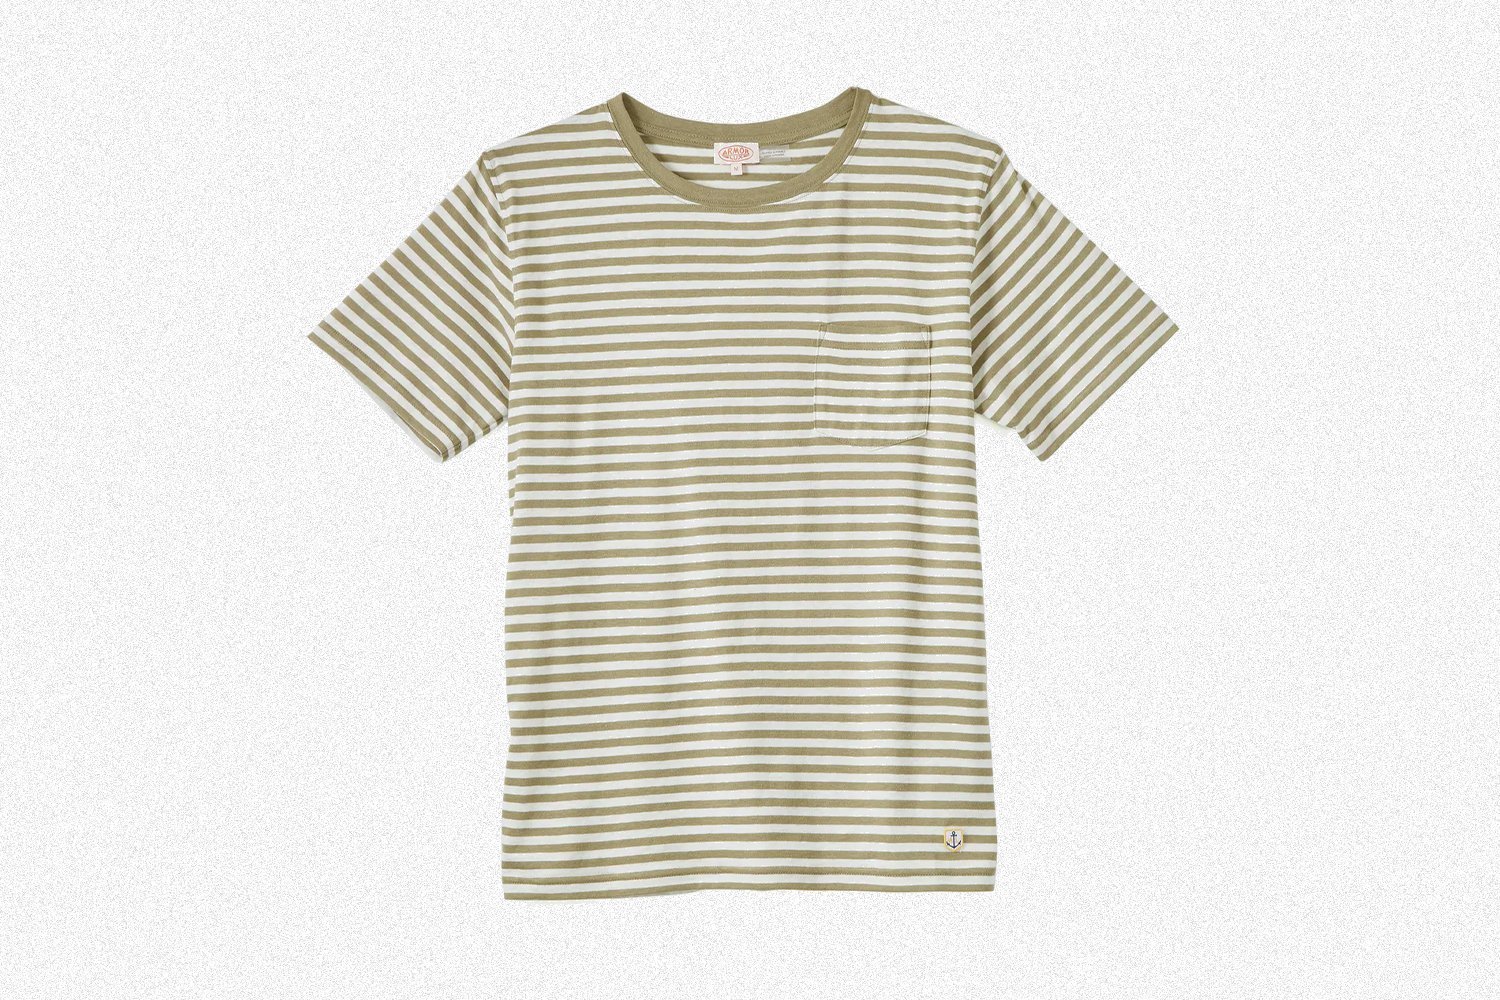 You can never go wrong with a striped tee.